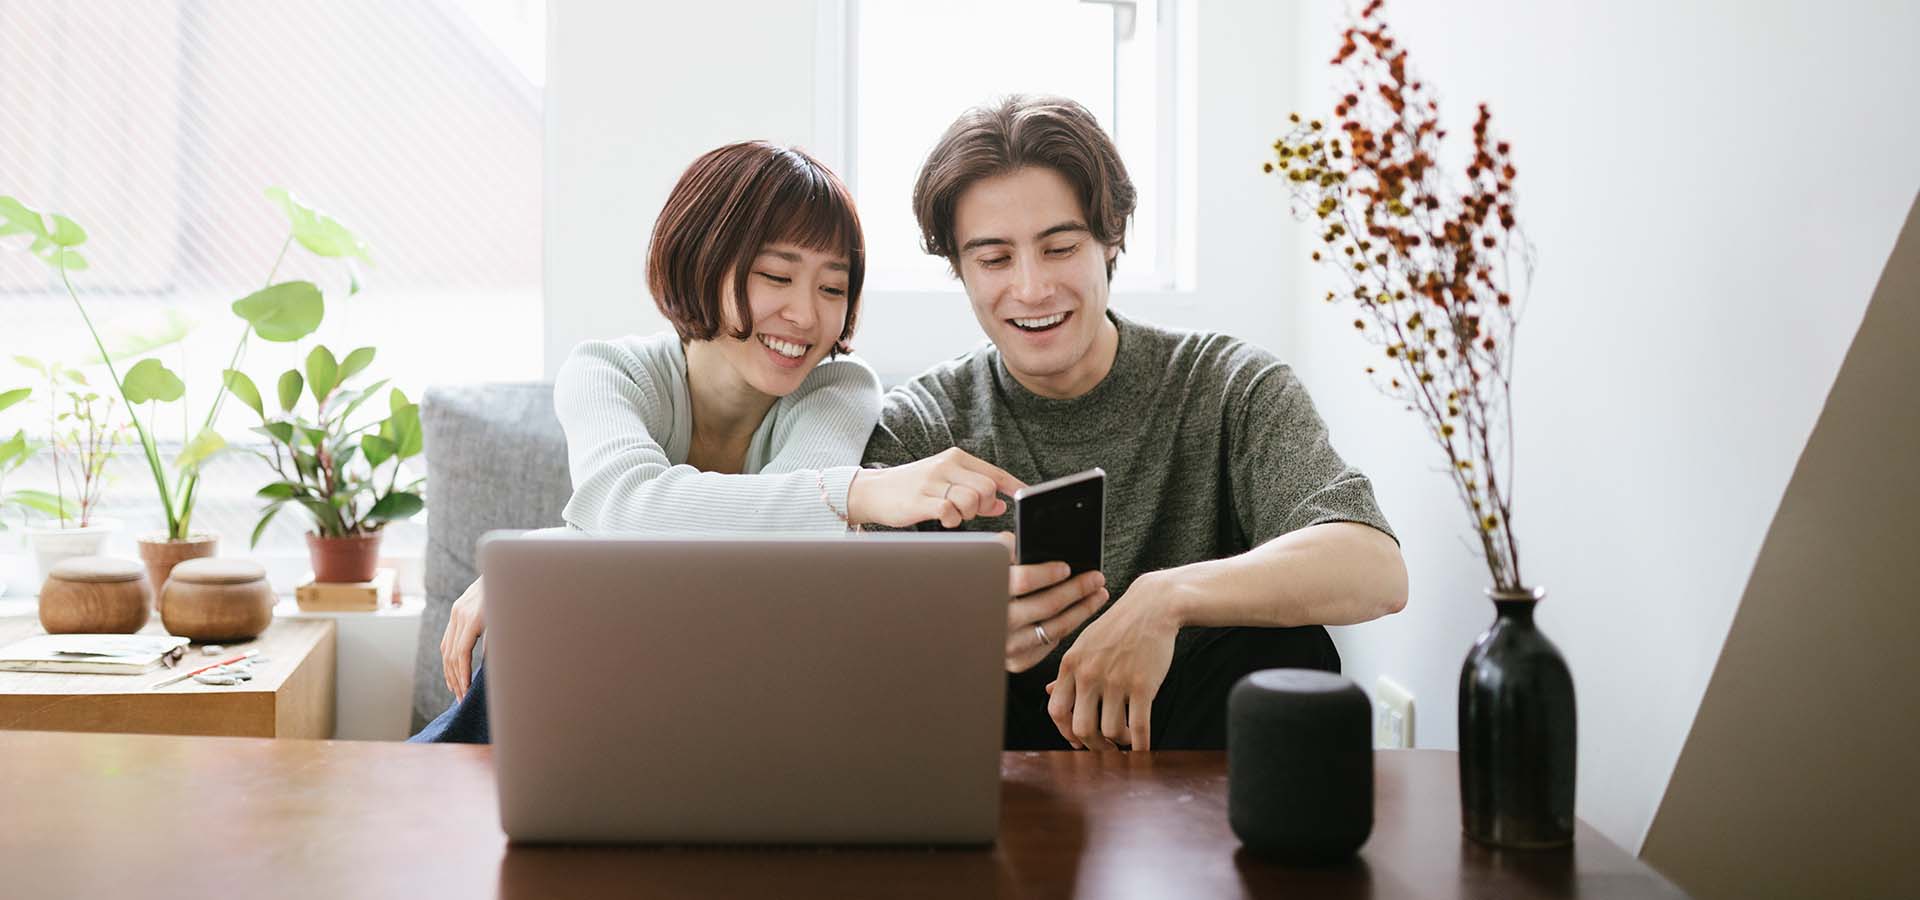 Two people next to an open laptop computer look at a mobile phone and smile.